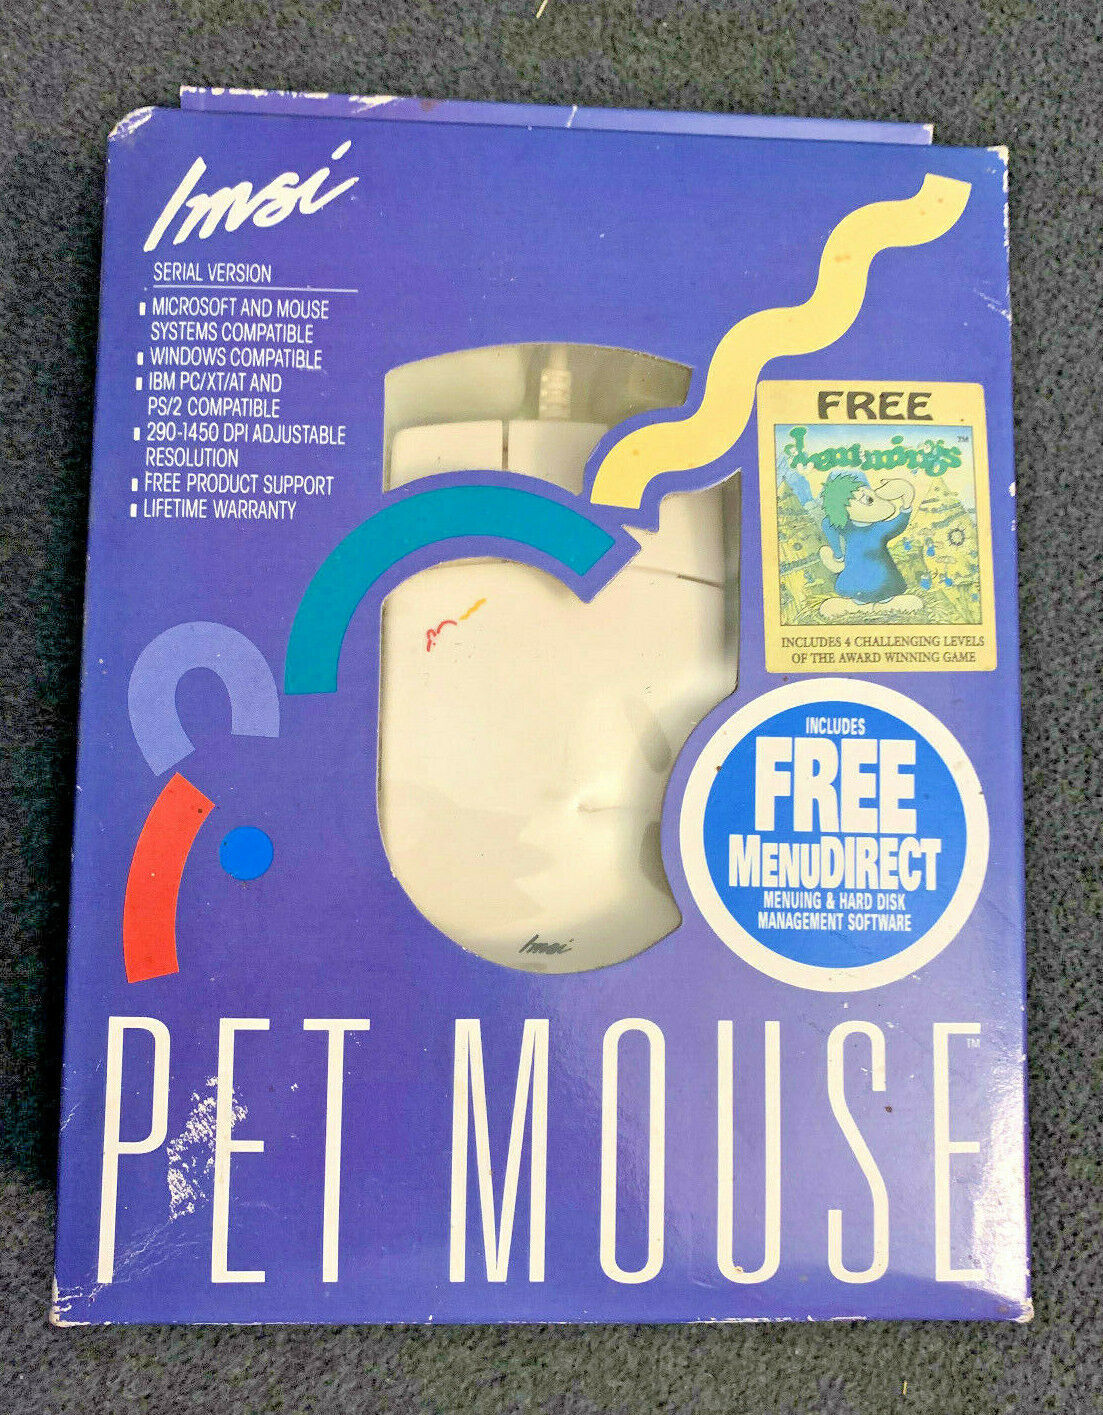 RARE Vintage IMSI PET MOUSE 3 Button Windows Mouse with 9 Pin Connector in Box